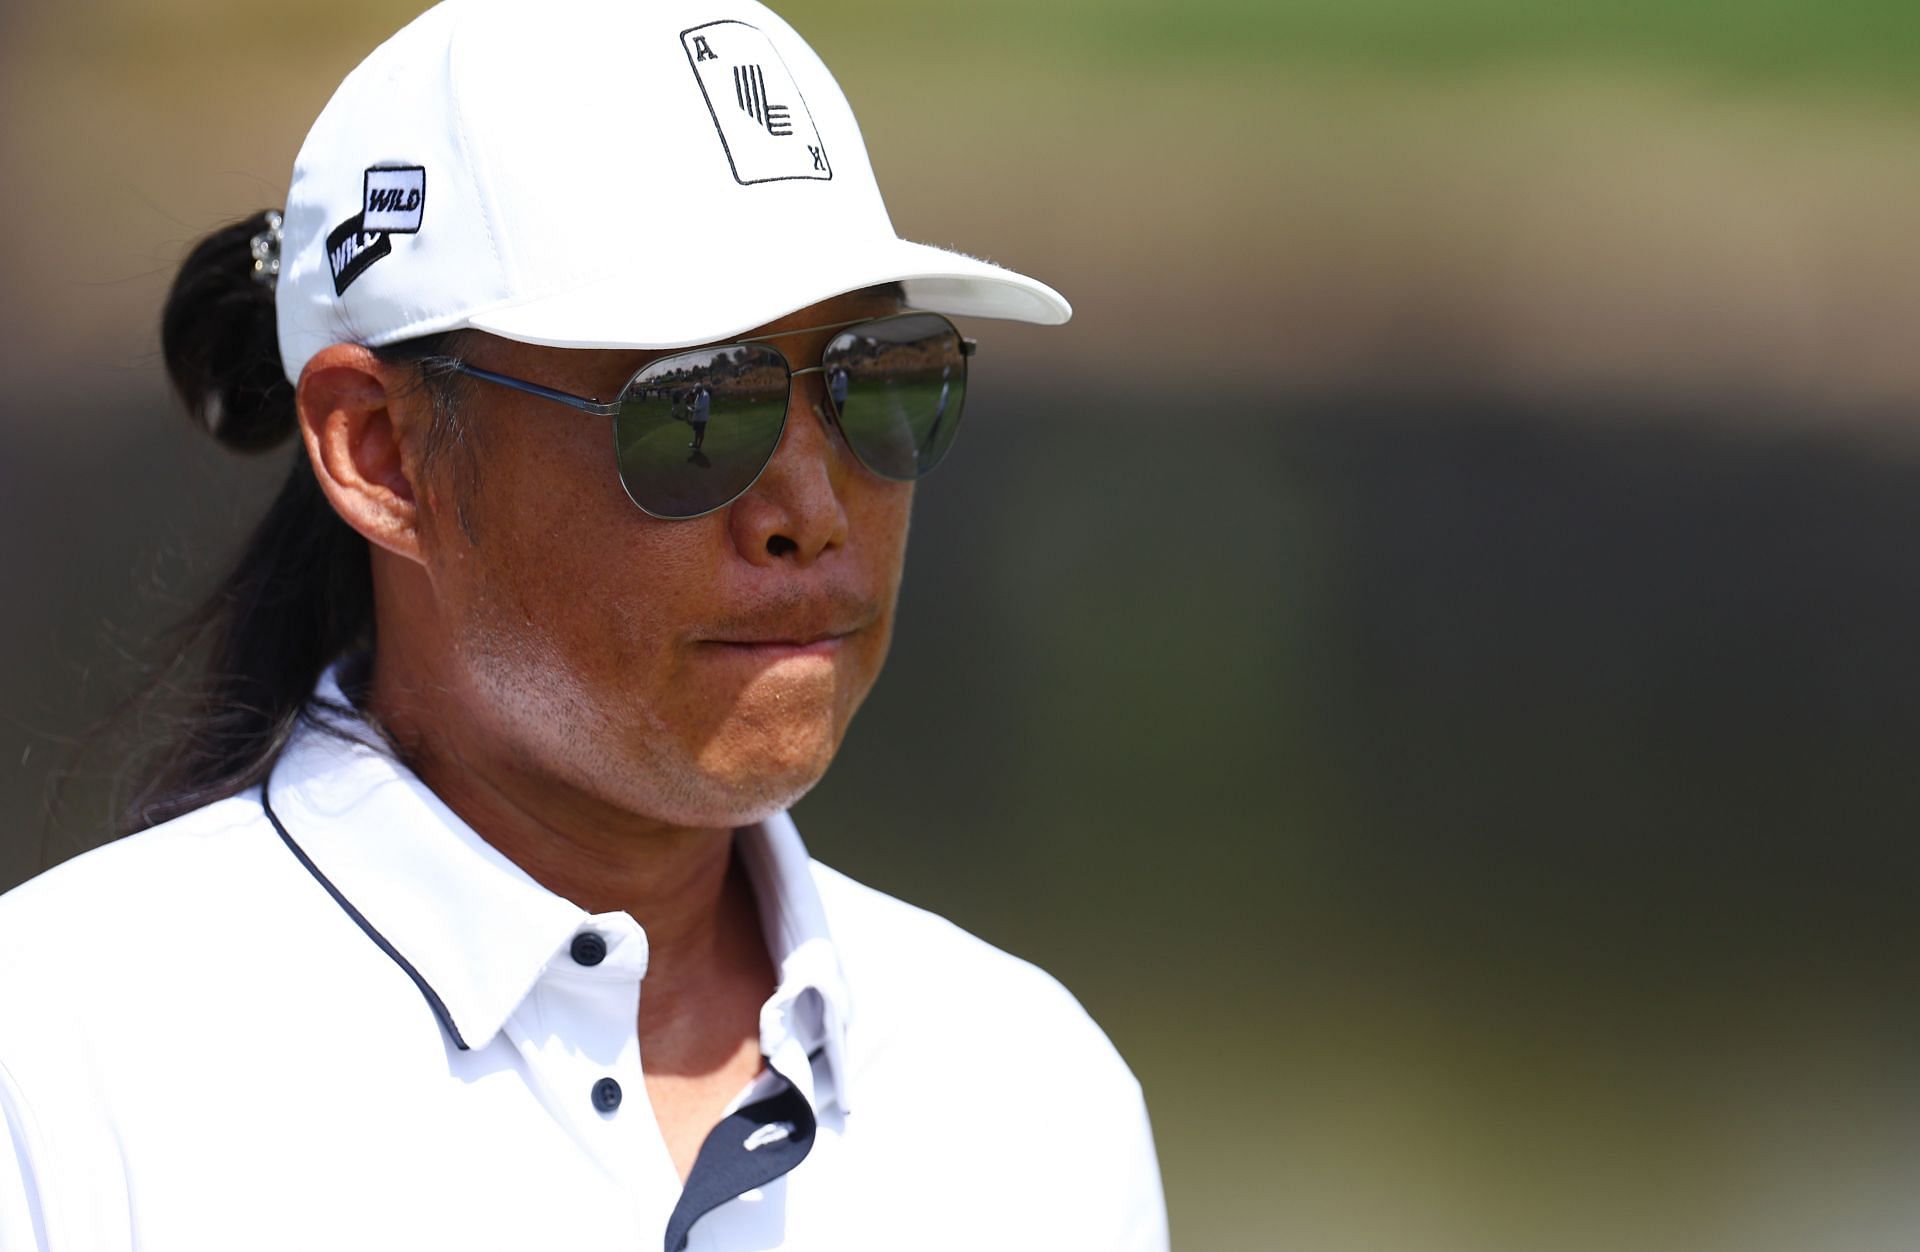 Anthony Kim returned to pro golf this weekend